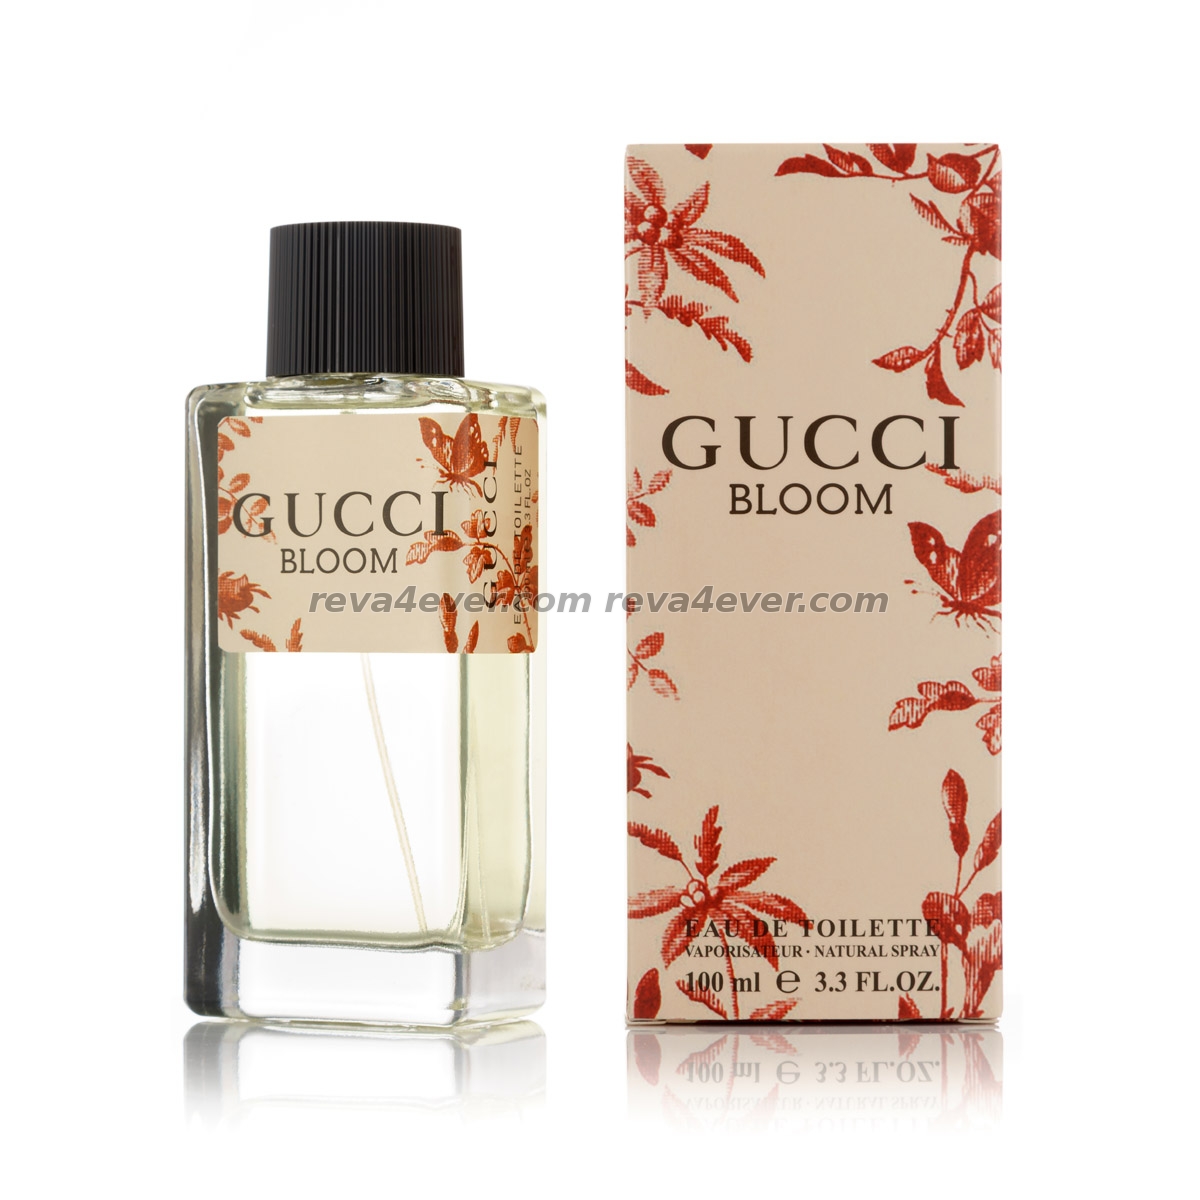 Gucci Bloom edt 100ml Imperatrice style